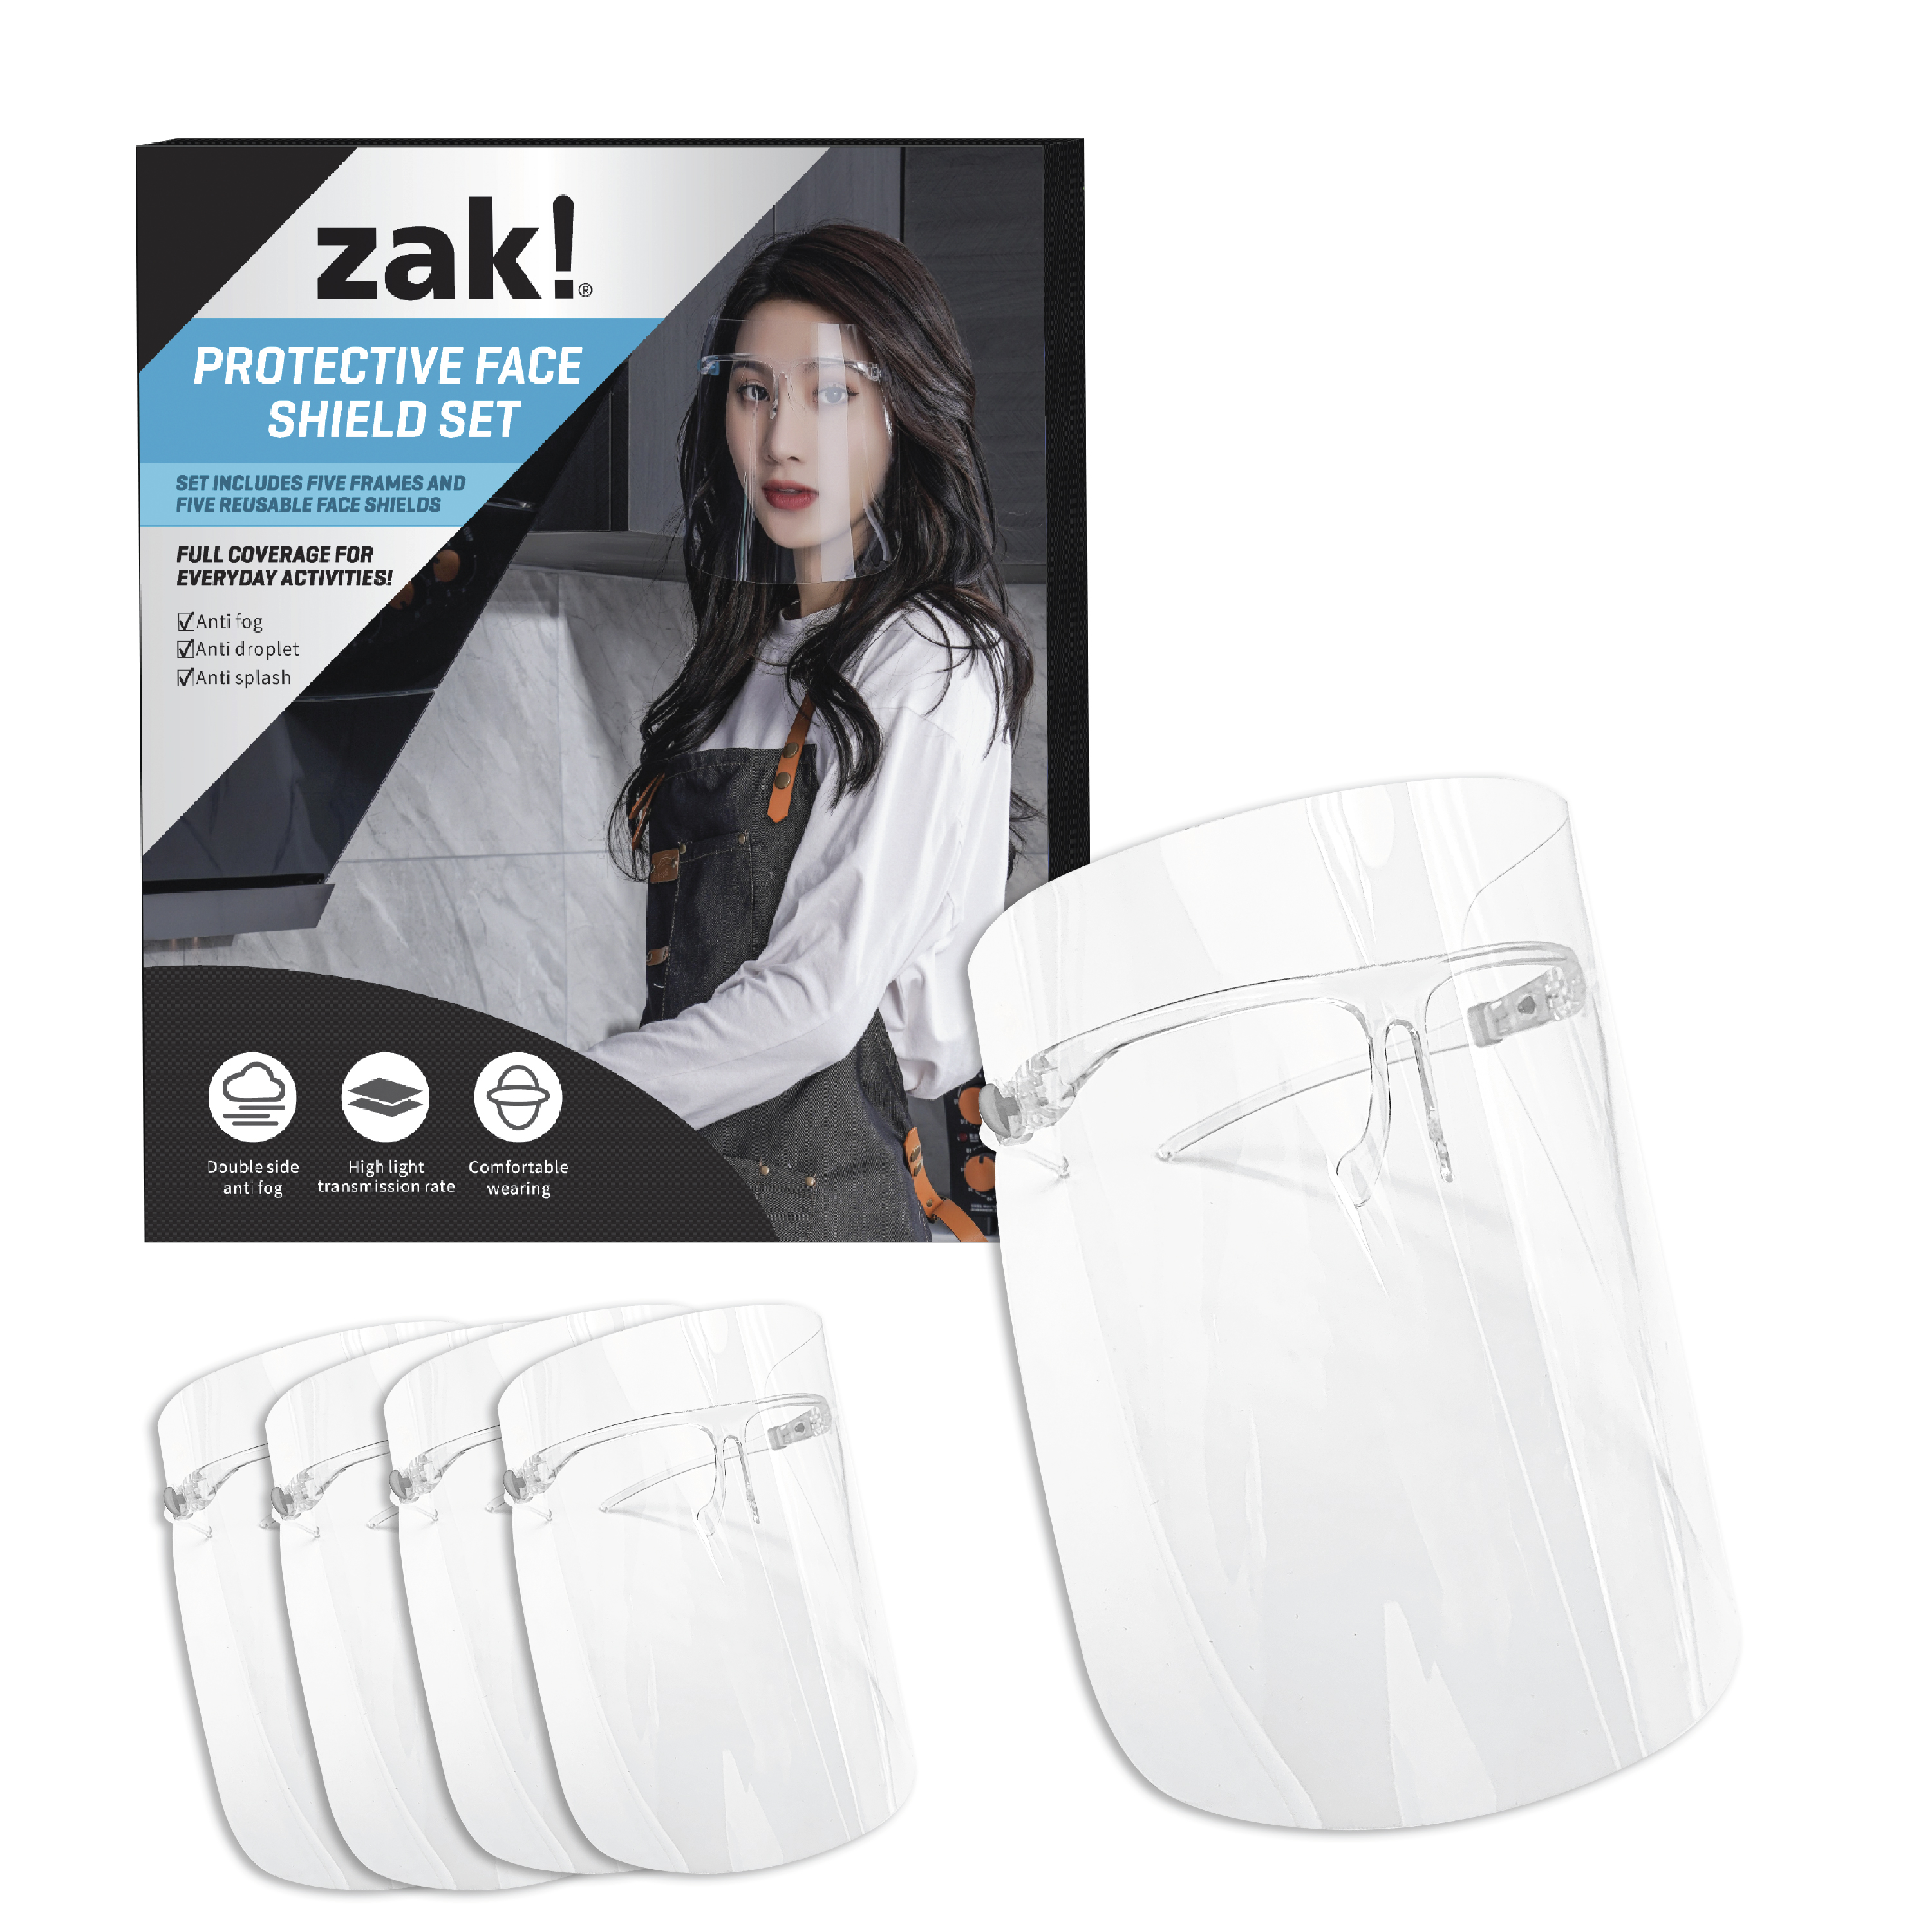 Zak Personal Protective Equipment (PPE) Protective Face Shield, Clear, 5-piece set slideshow image 1